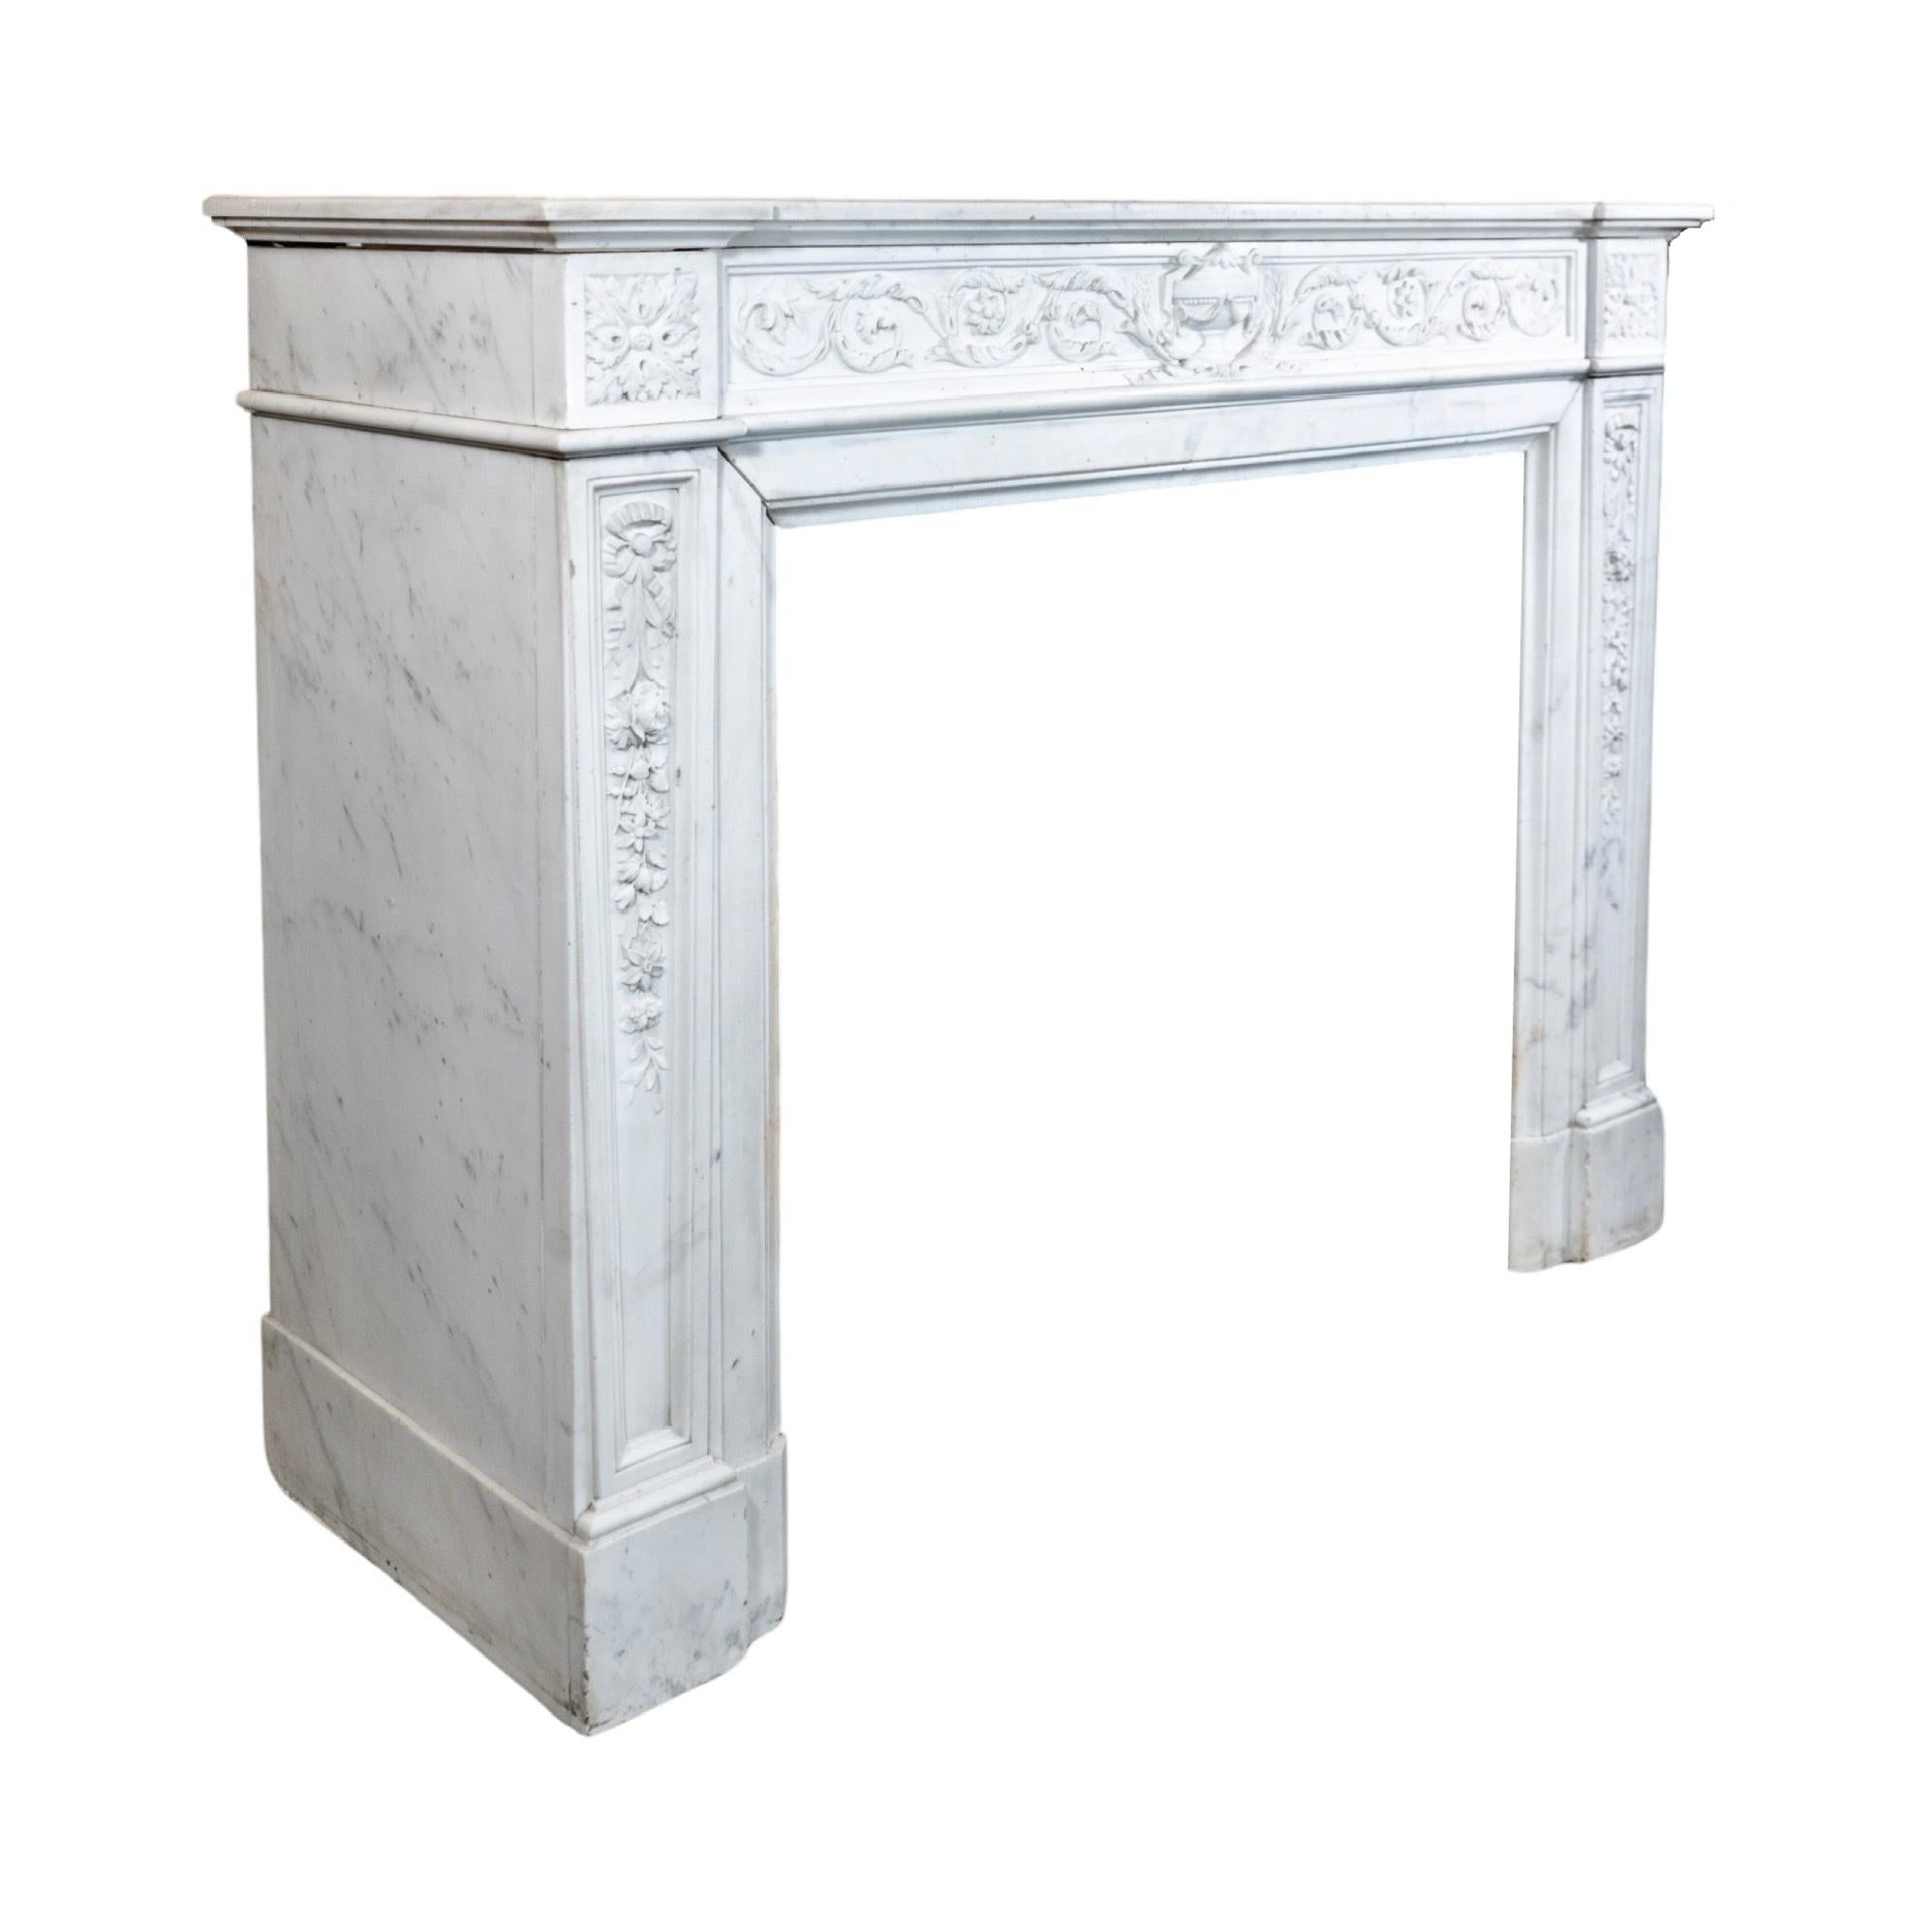 Mid-19th Century Carrara Marble Mantel from France For Sale 2